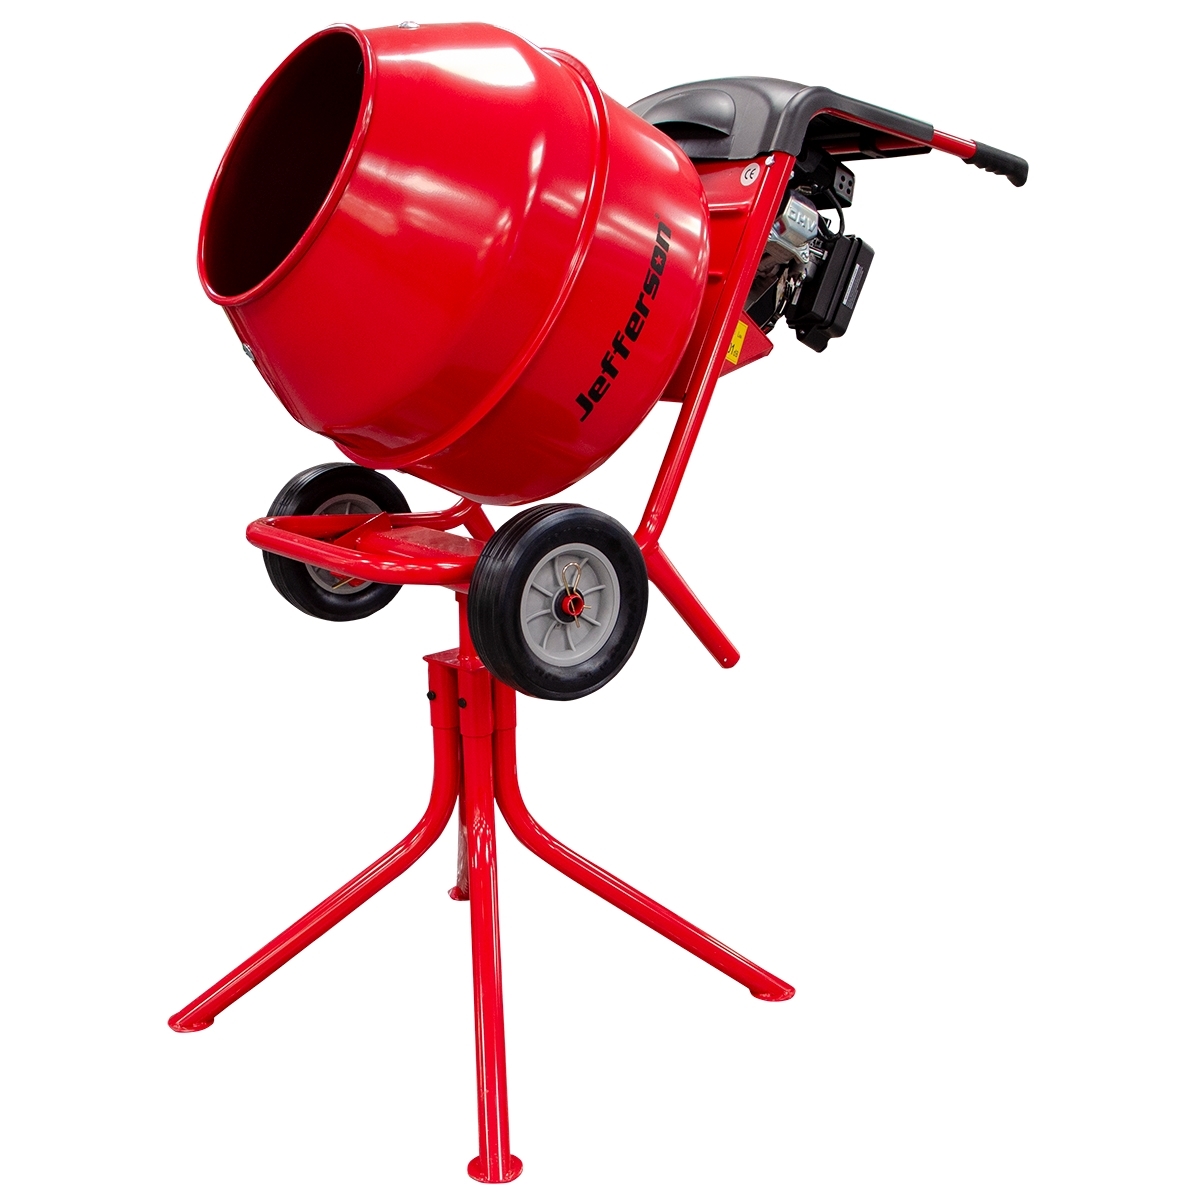 Red Petrol Cement Mixer 2.5HP (Loncin Engine)